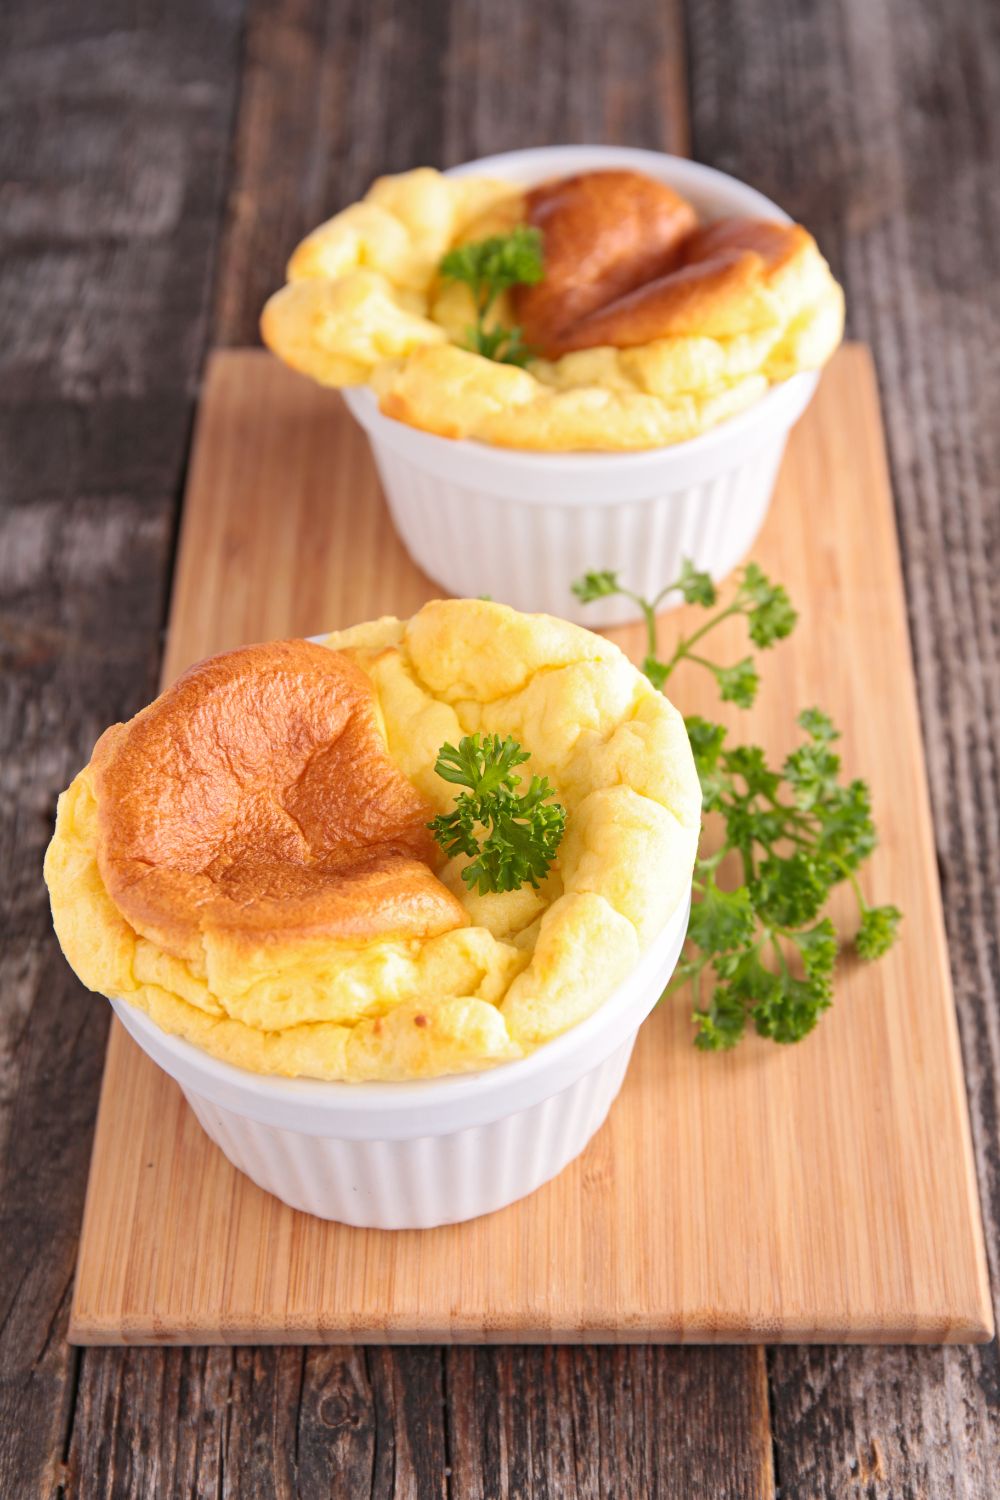 Jamie Oliver Twice Baked Cheese Soufflé